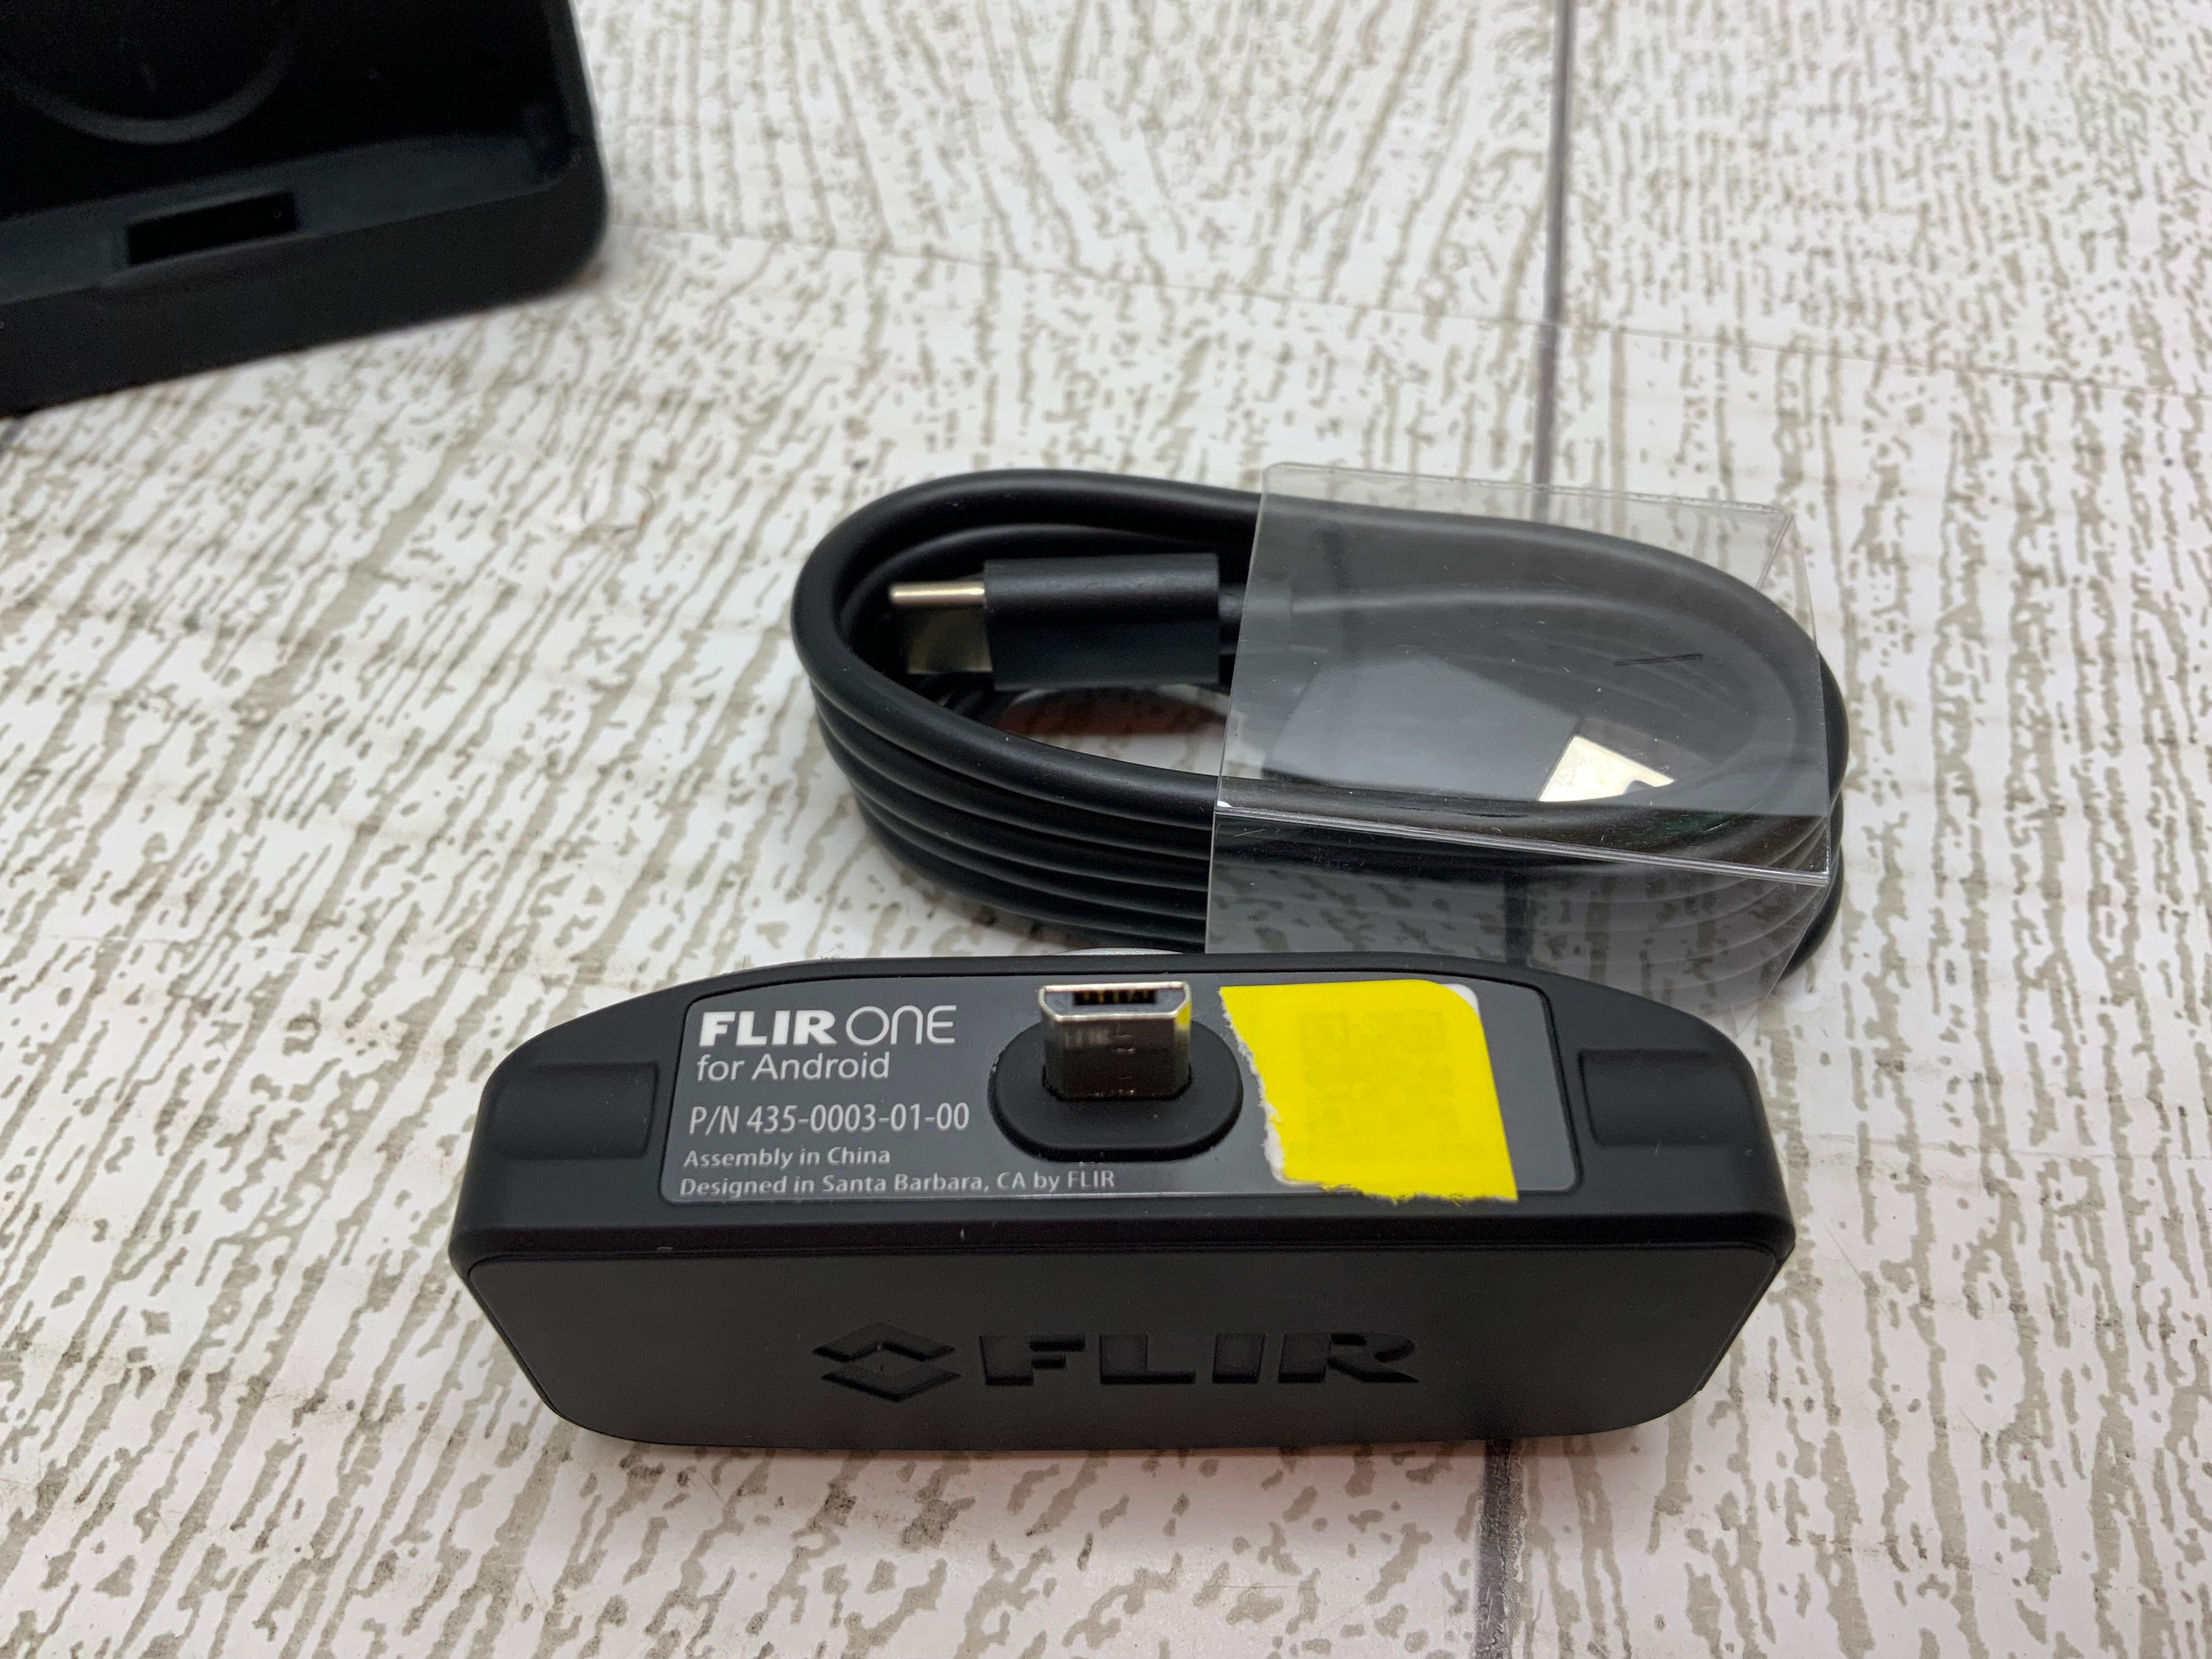 Flir One Thermal Imager For Android **Untested, Unkown Item** (8041317859566)